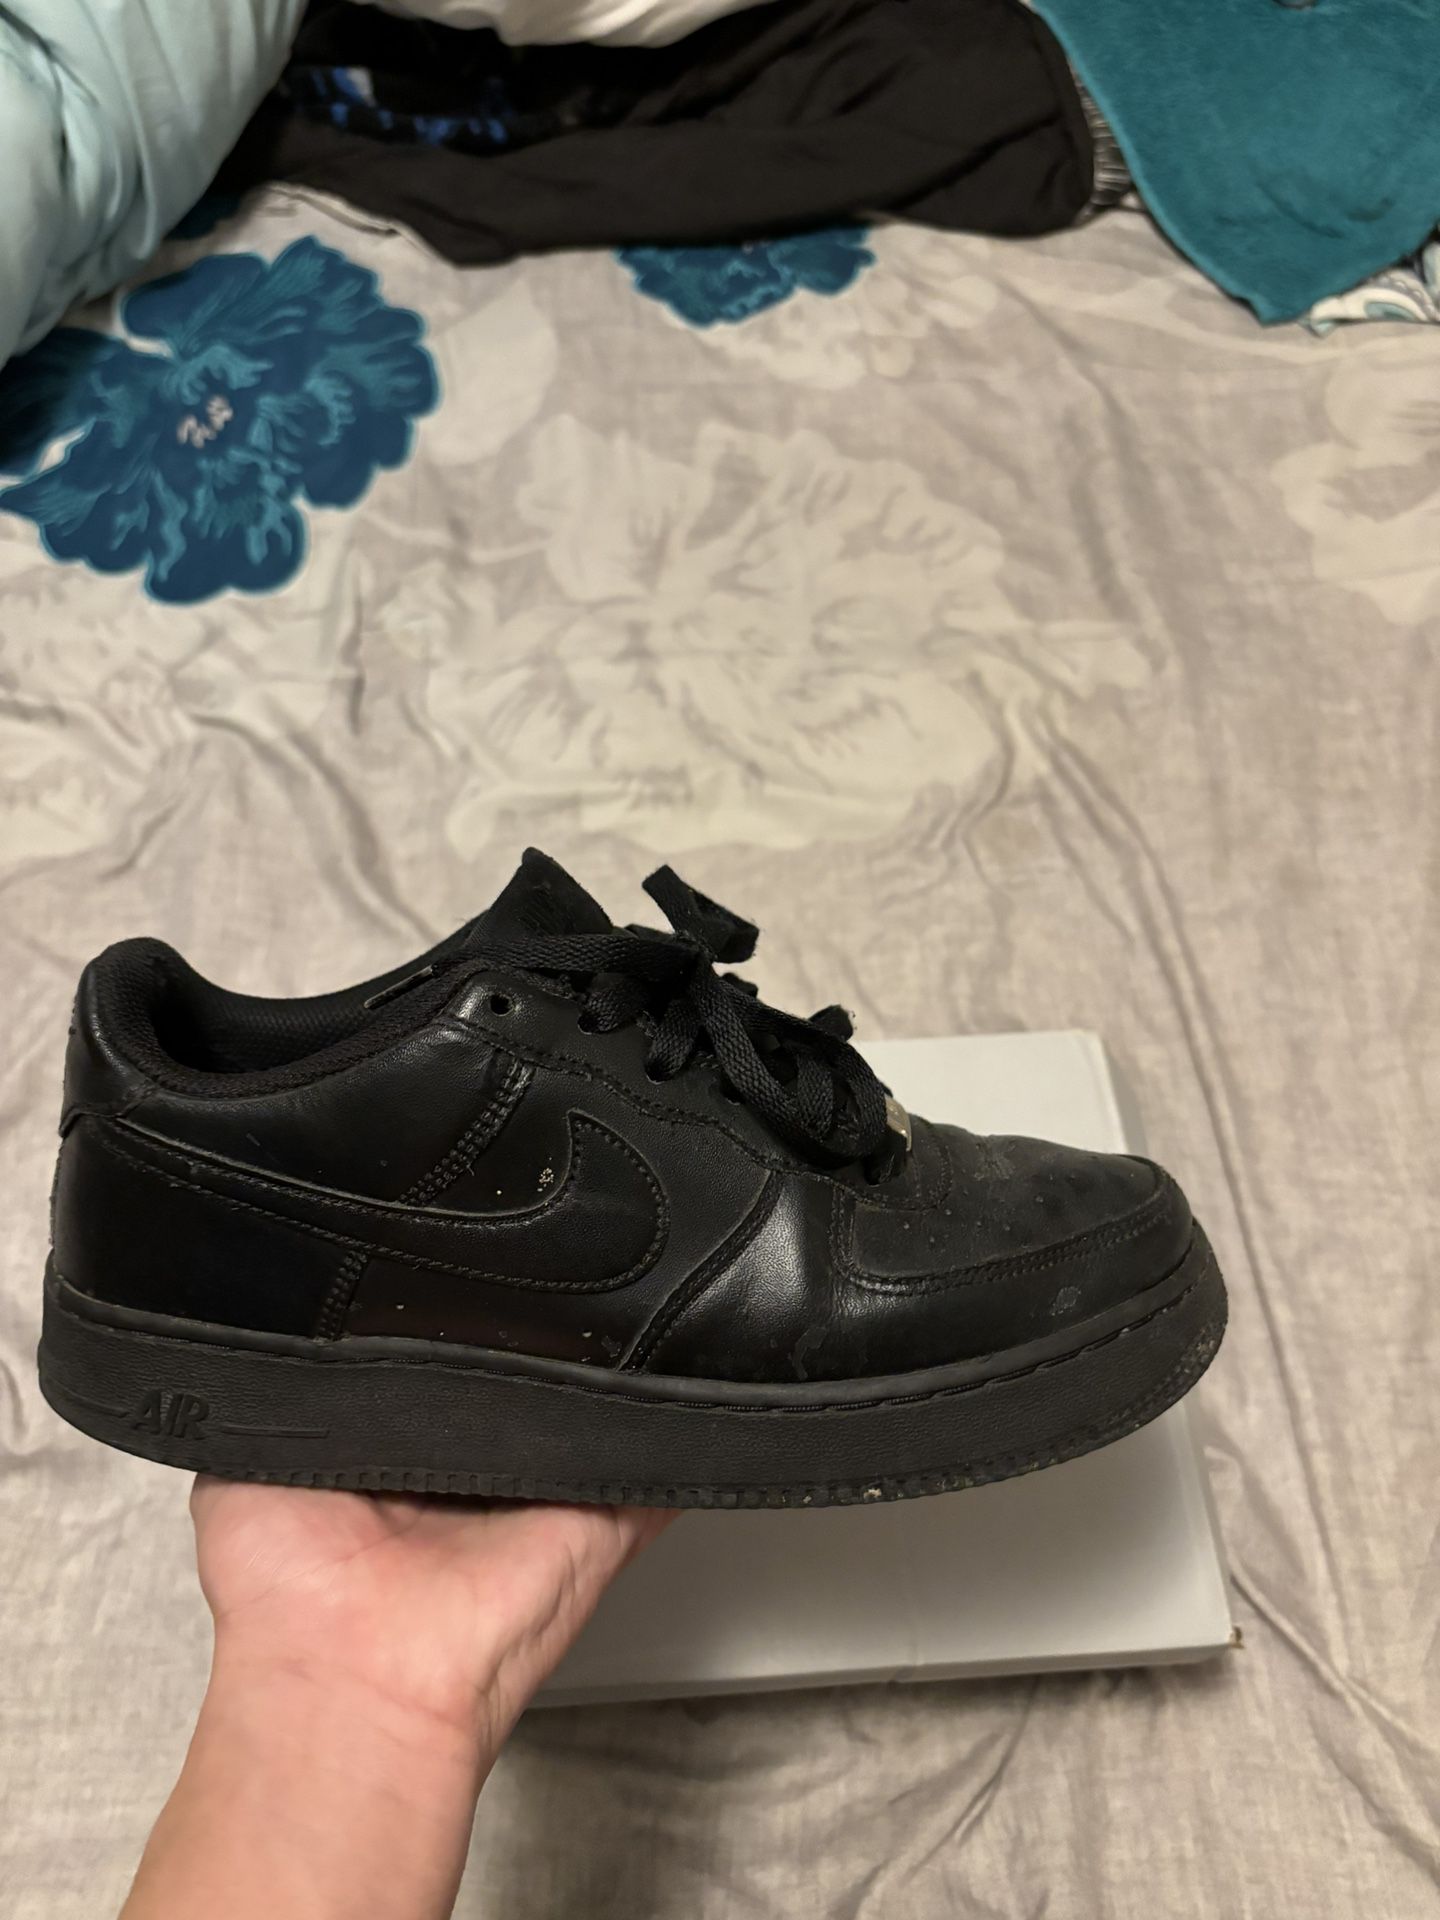 Nike black air forces size 6.5